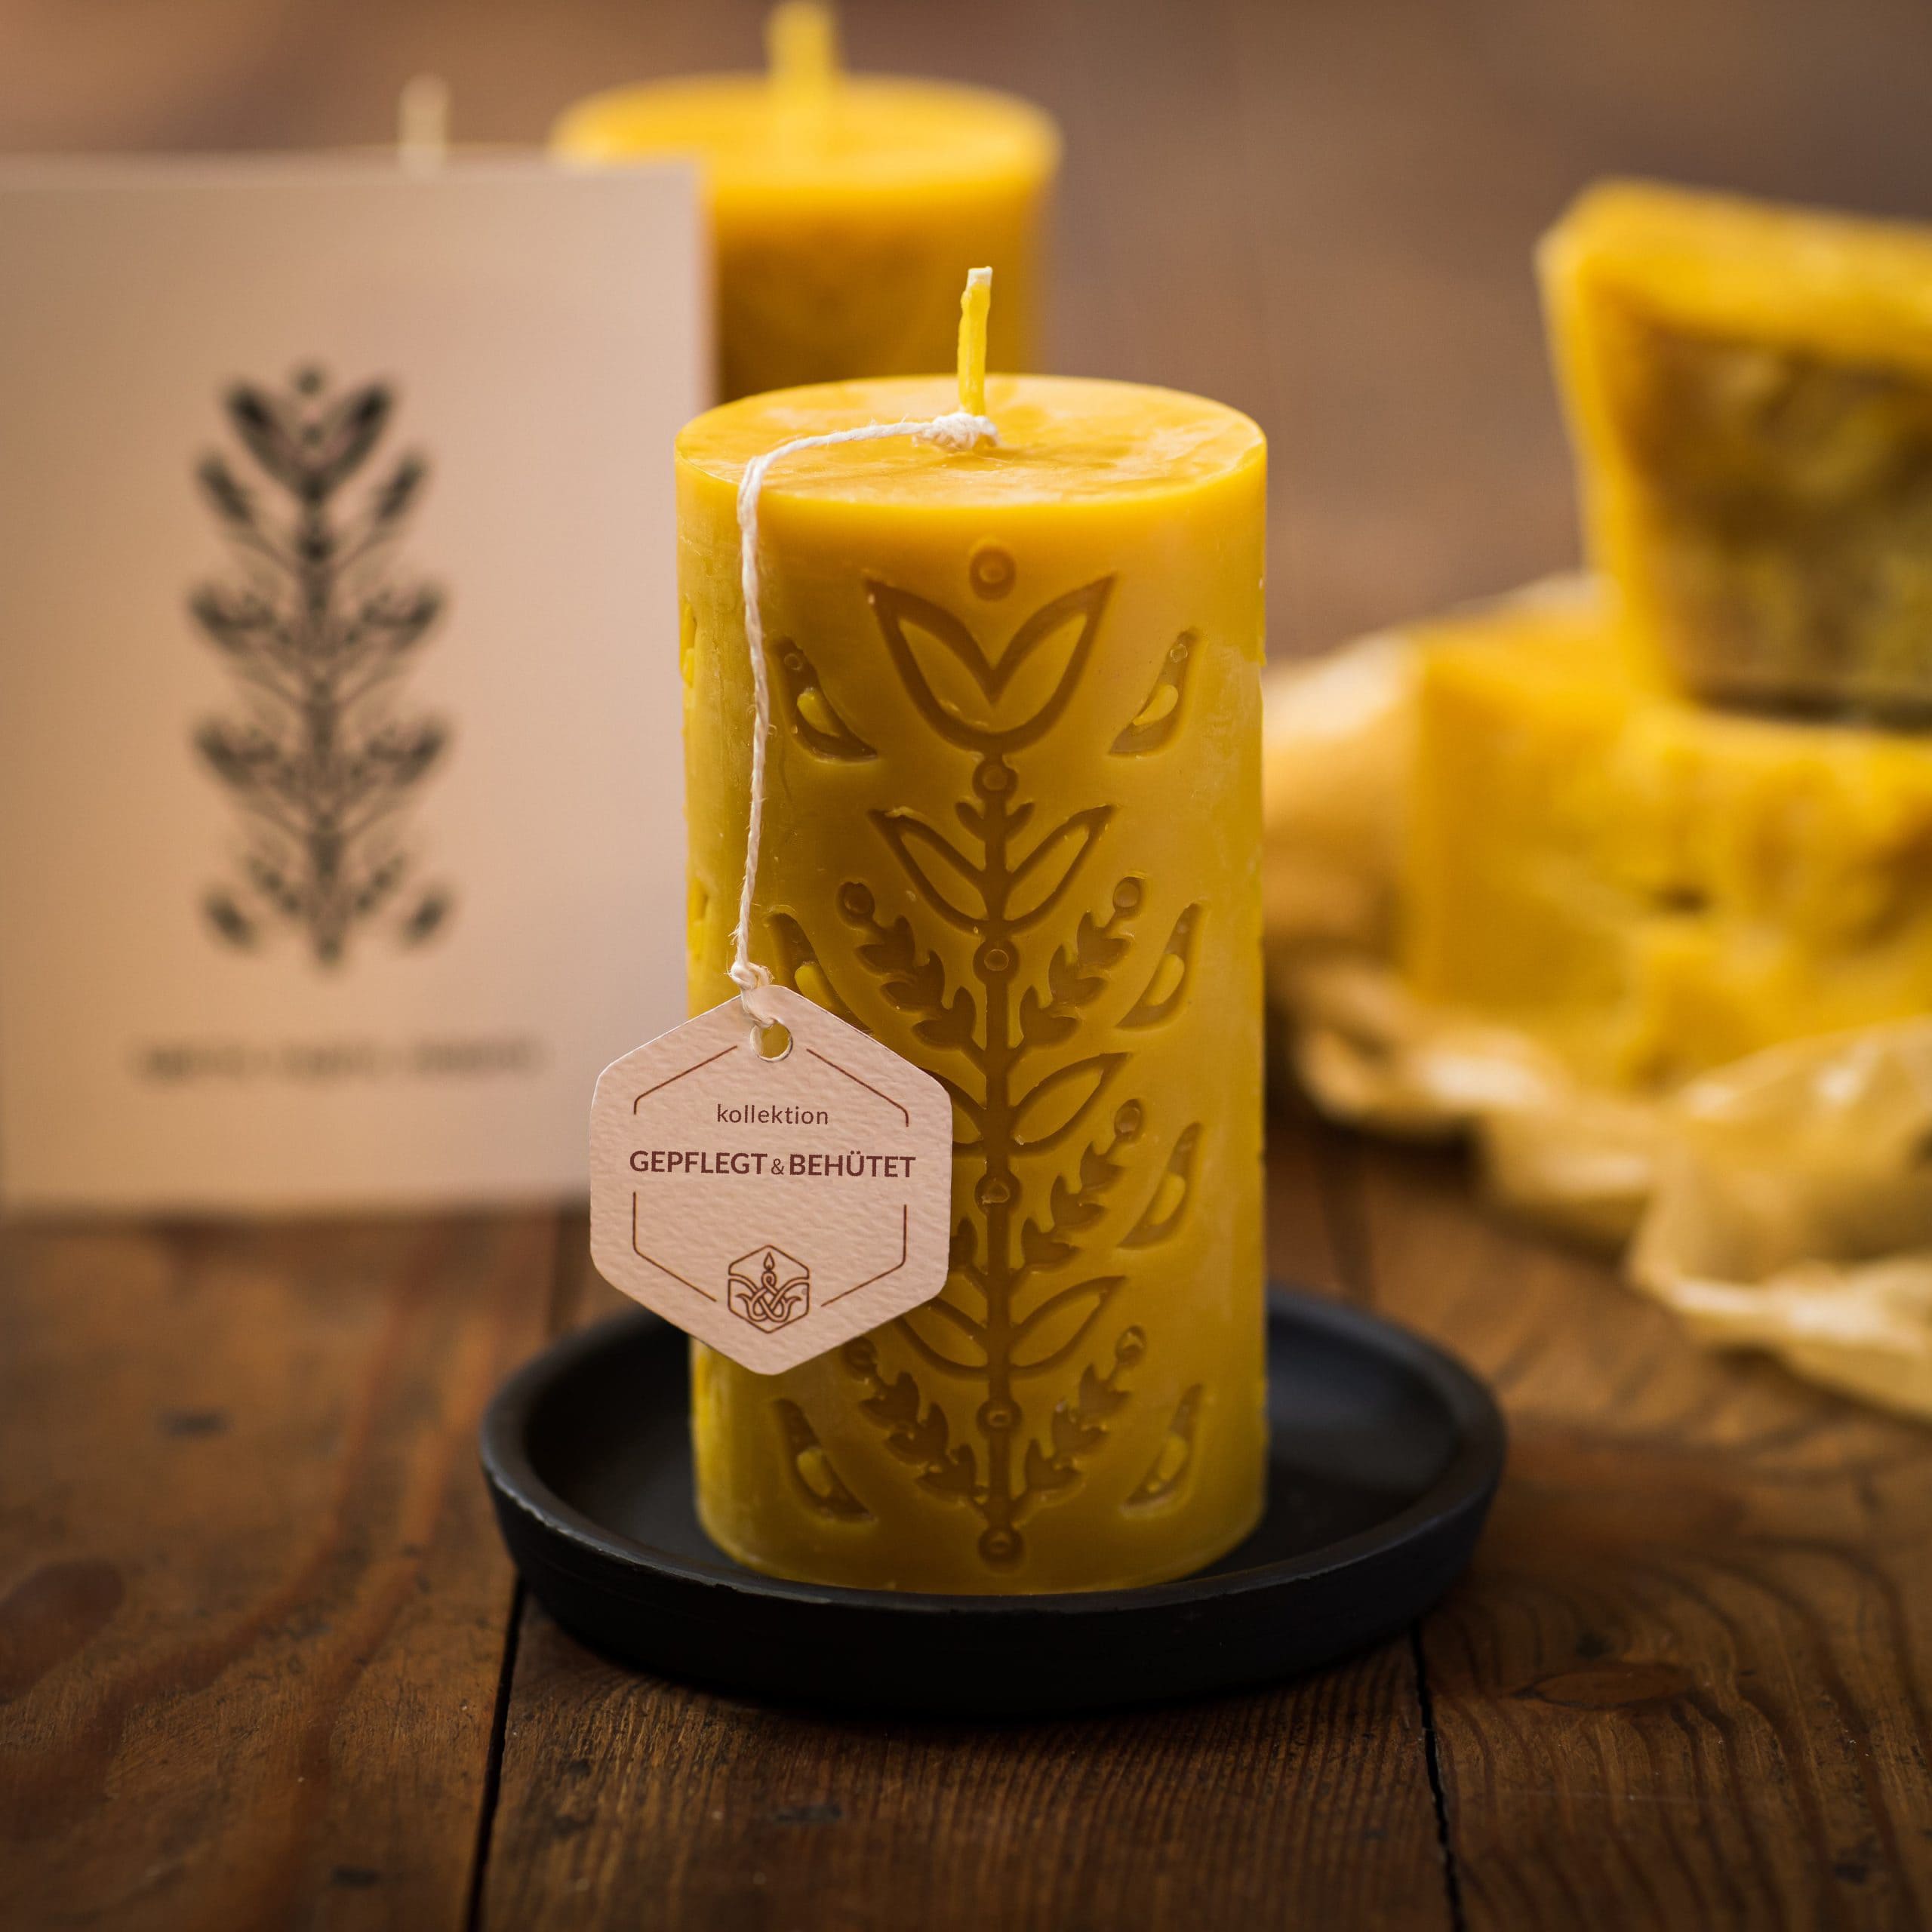 Beeswax candle “Tsvitna”